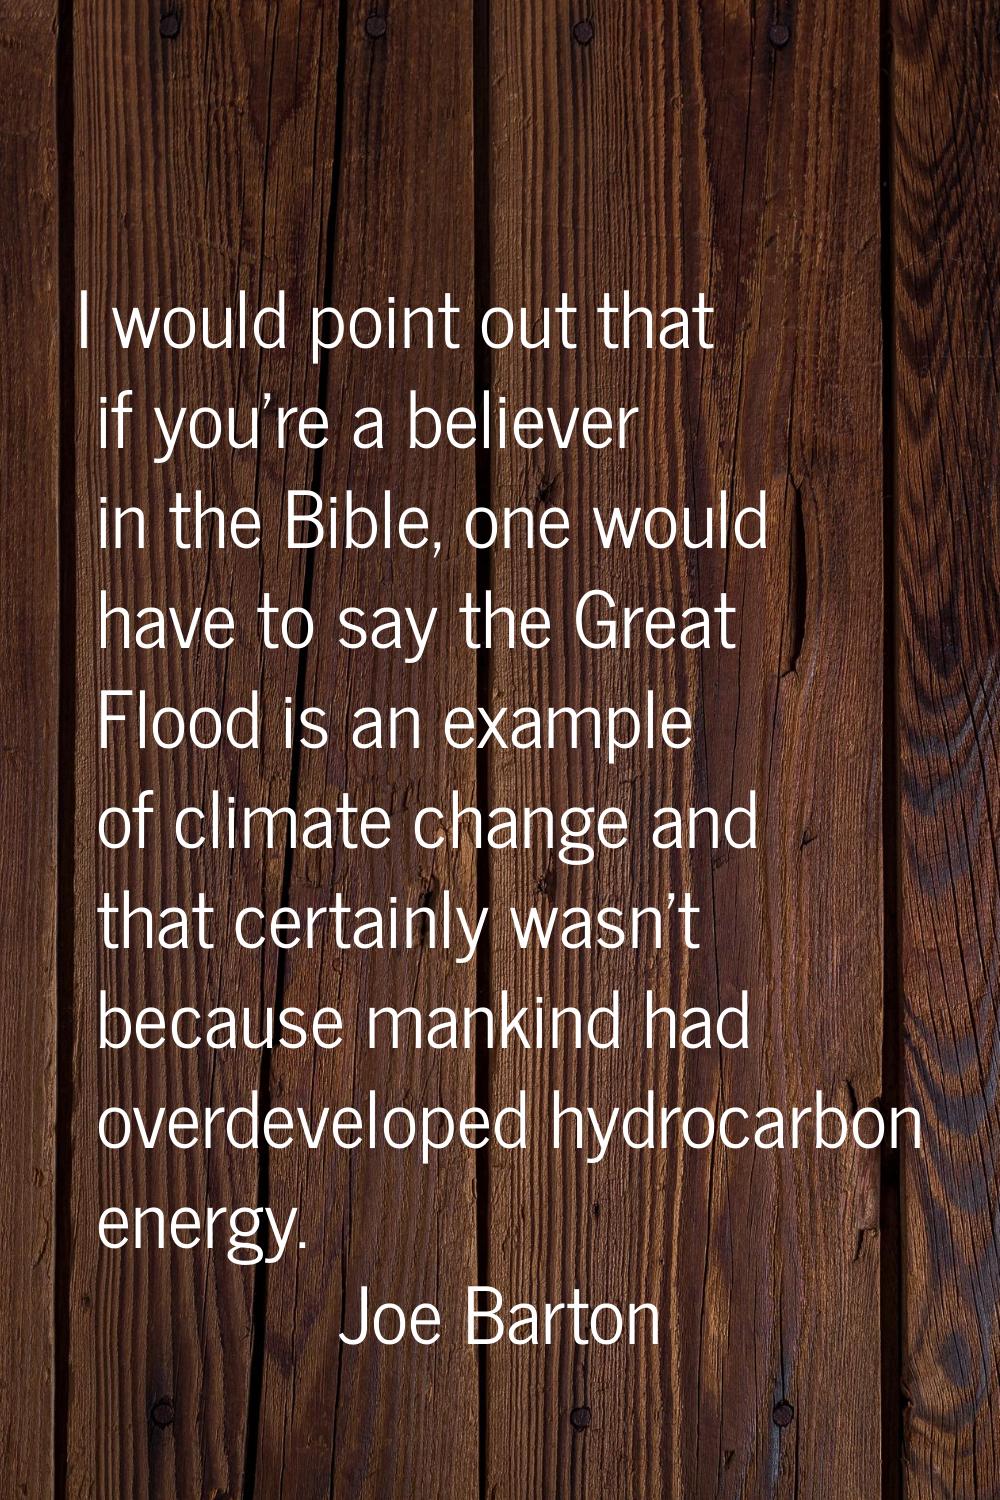 I would point out that if you're a believer in the Bible, one would have to say the Great Flood is 